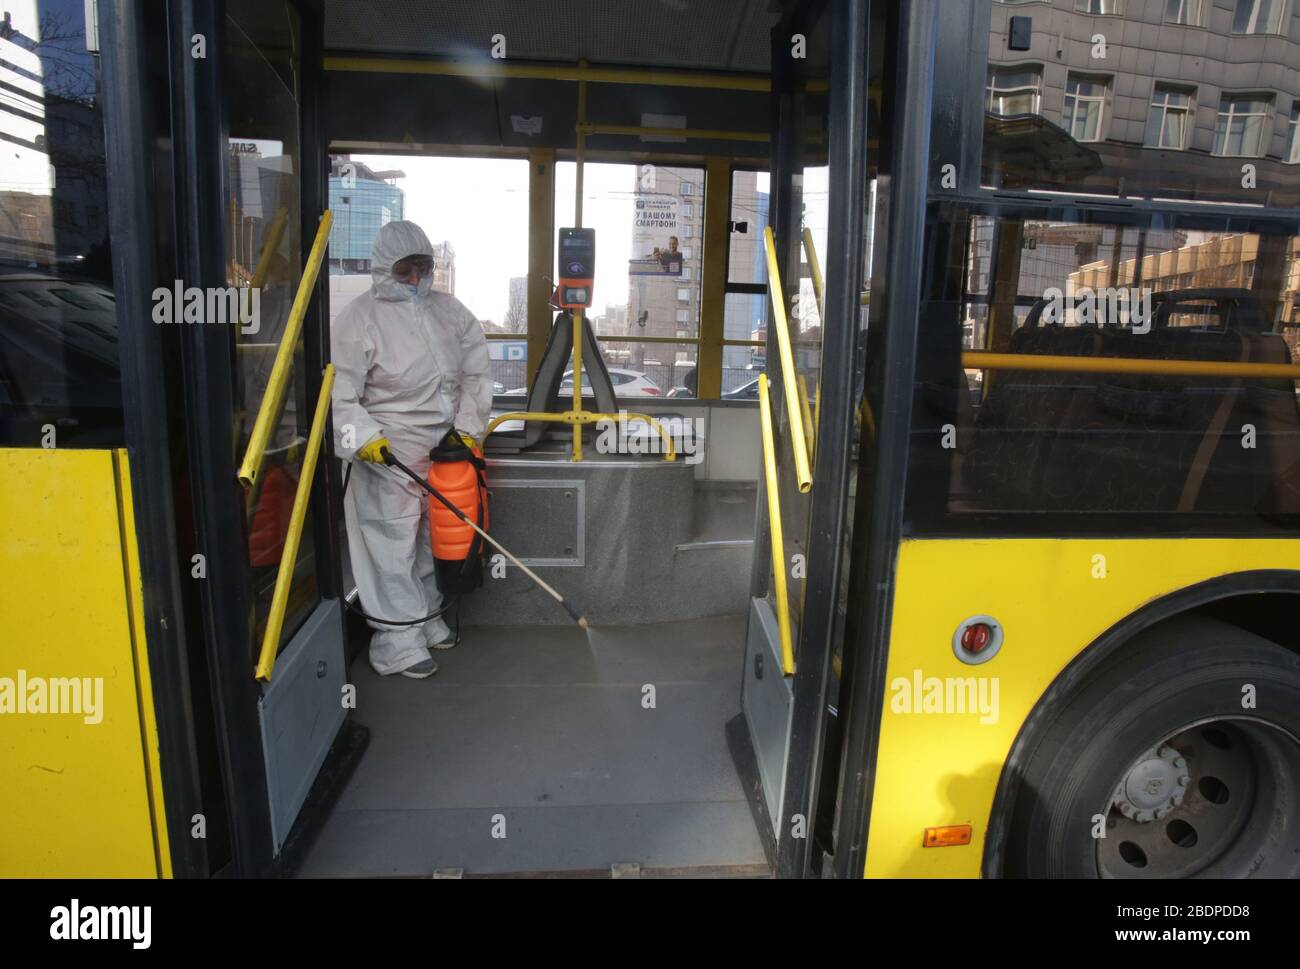 Kiev, Ukraine. 8th Apr, 2020. A staff member disinfects a bus in Kiev, Ukraine, April 8, 2020. The death toll from COVID-19 in Ukraine rose to 57 on Thursday, as the total cases reached 1,892, the country's health ministry said. On March 25, Ukraine introduced emergency measures across the country through April 24 to contain the spread of the disease. Credit: Sergey Starostenko/Xinhua/Alamy Live News Stock Photo